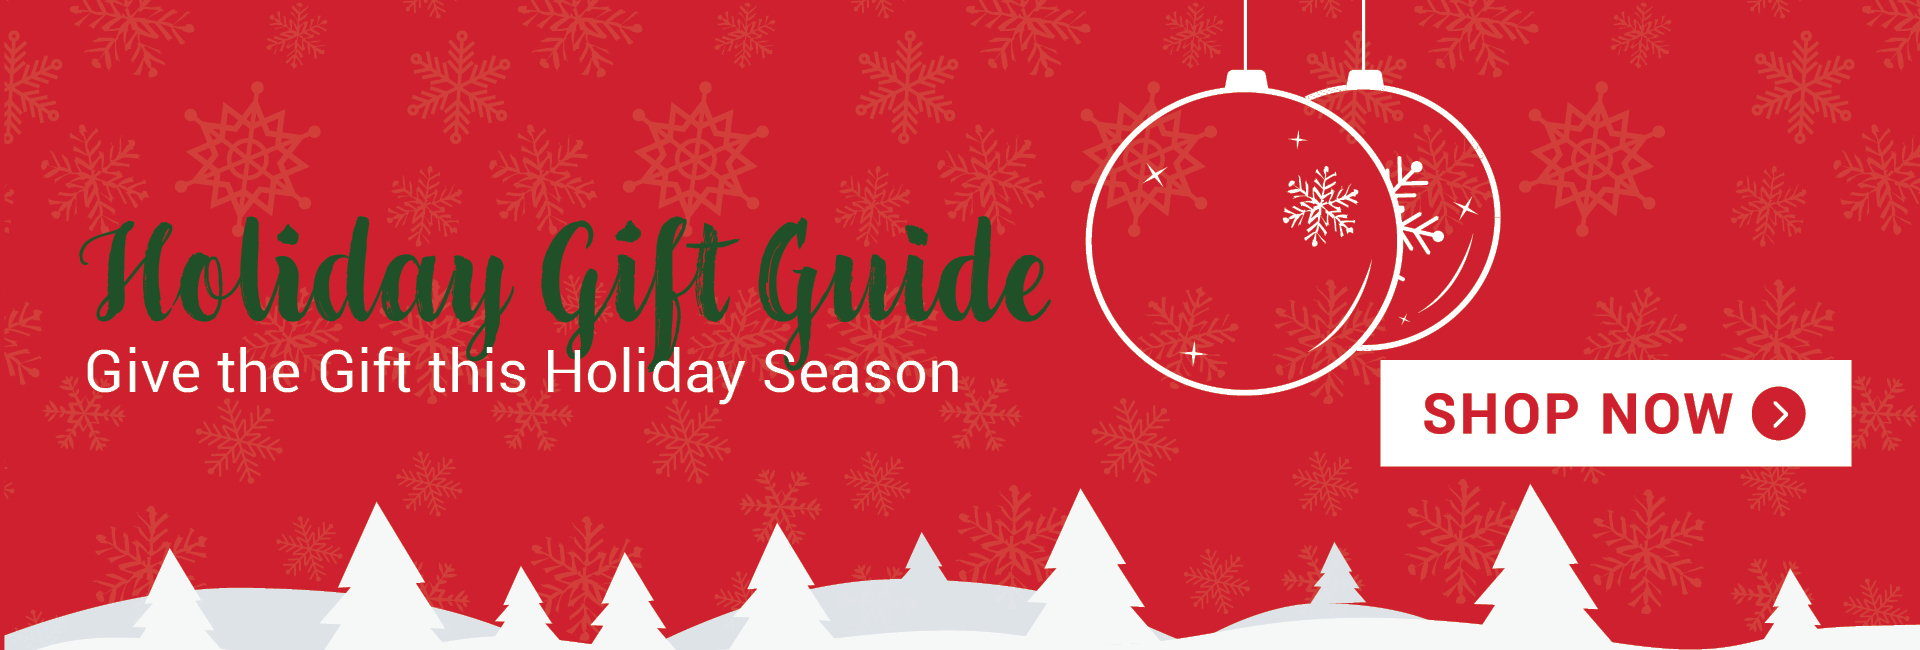 holiday-gift-guide-banner-2